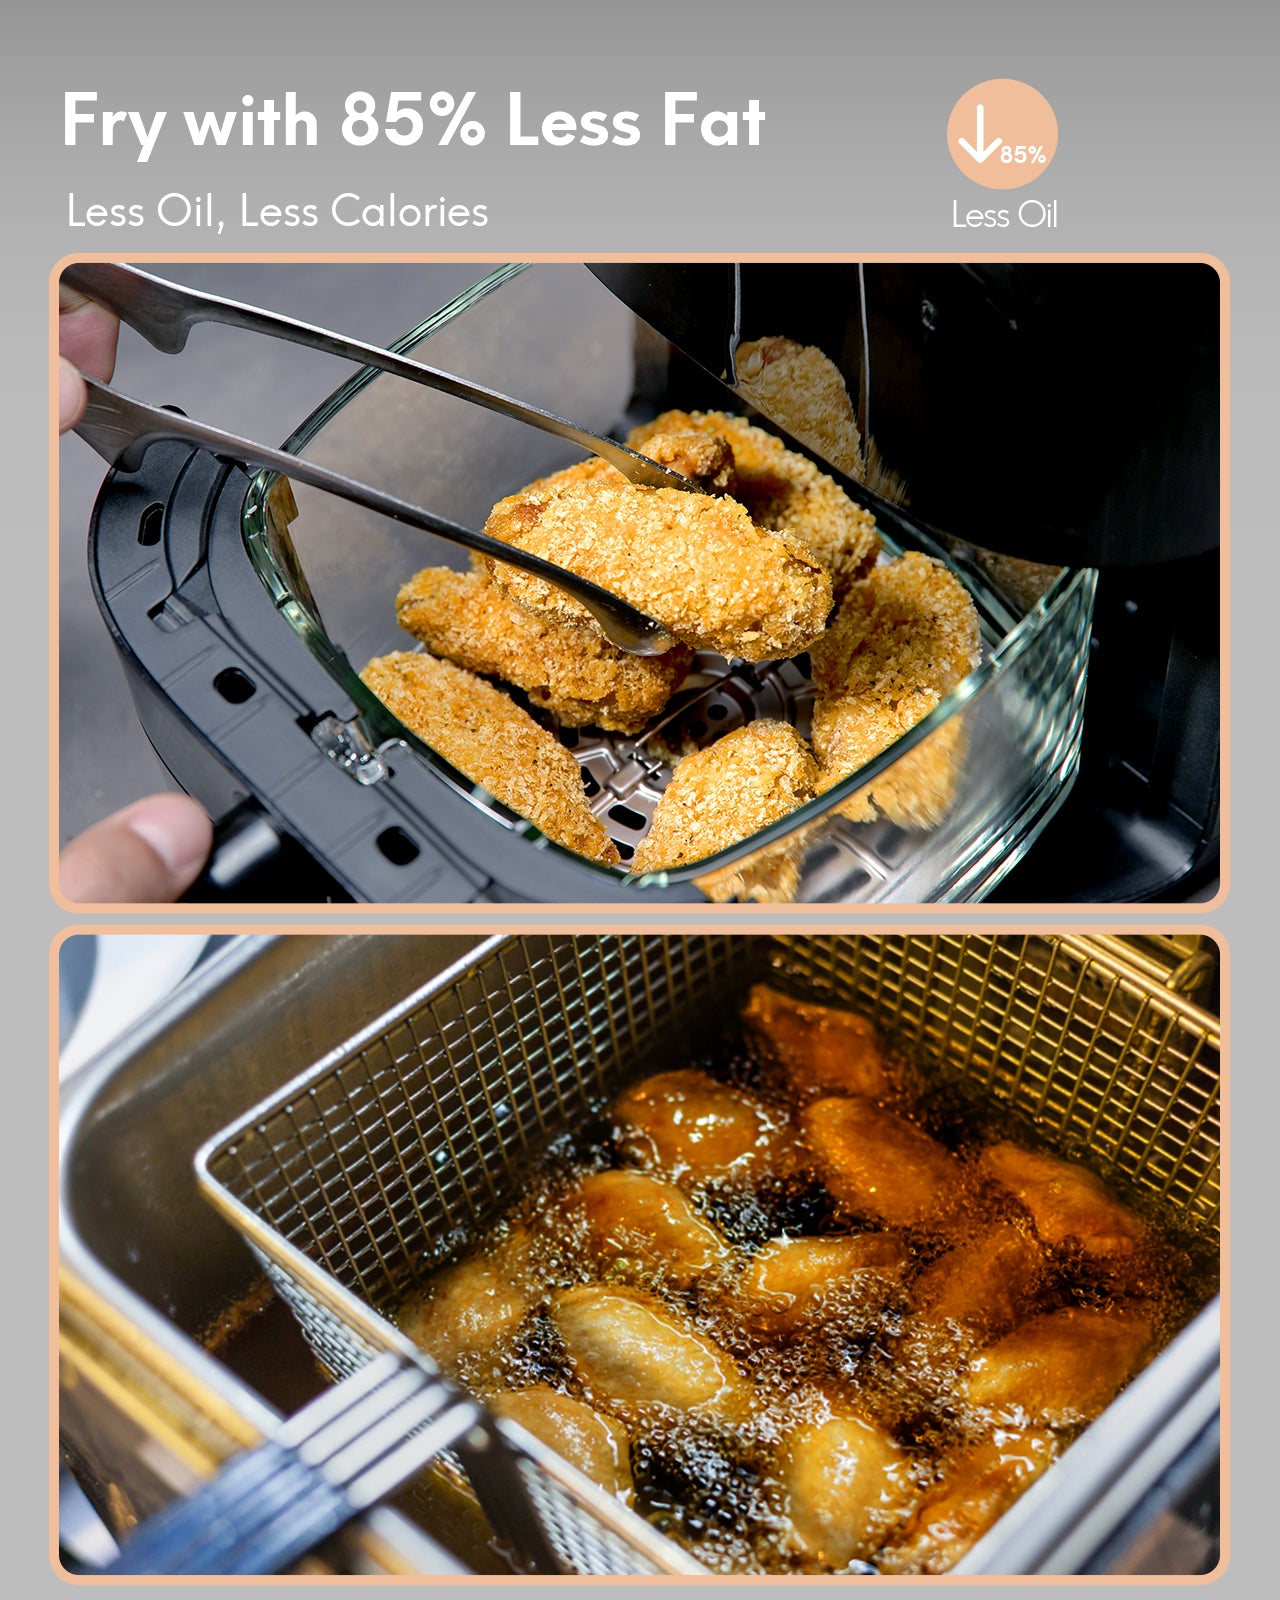 Load image into Gallery viewer, 3.5QT Air Fryer, Oilless Air Fryer Oven Cooker with LED Screen, Nonstick Dishwasher Safe Basket
